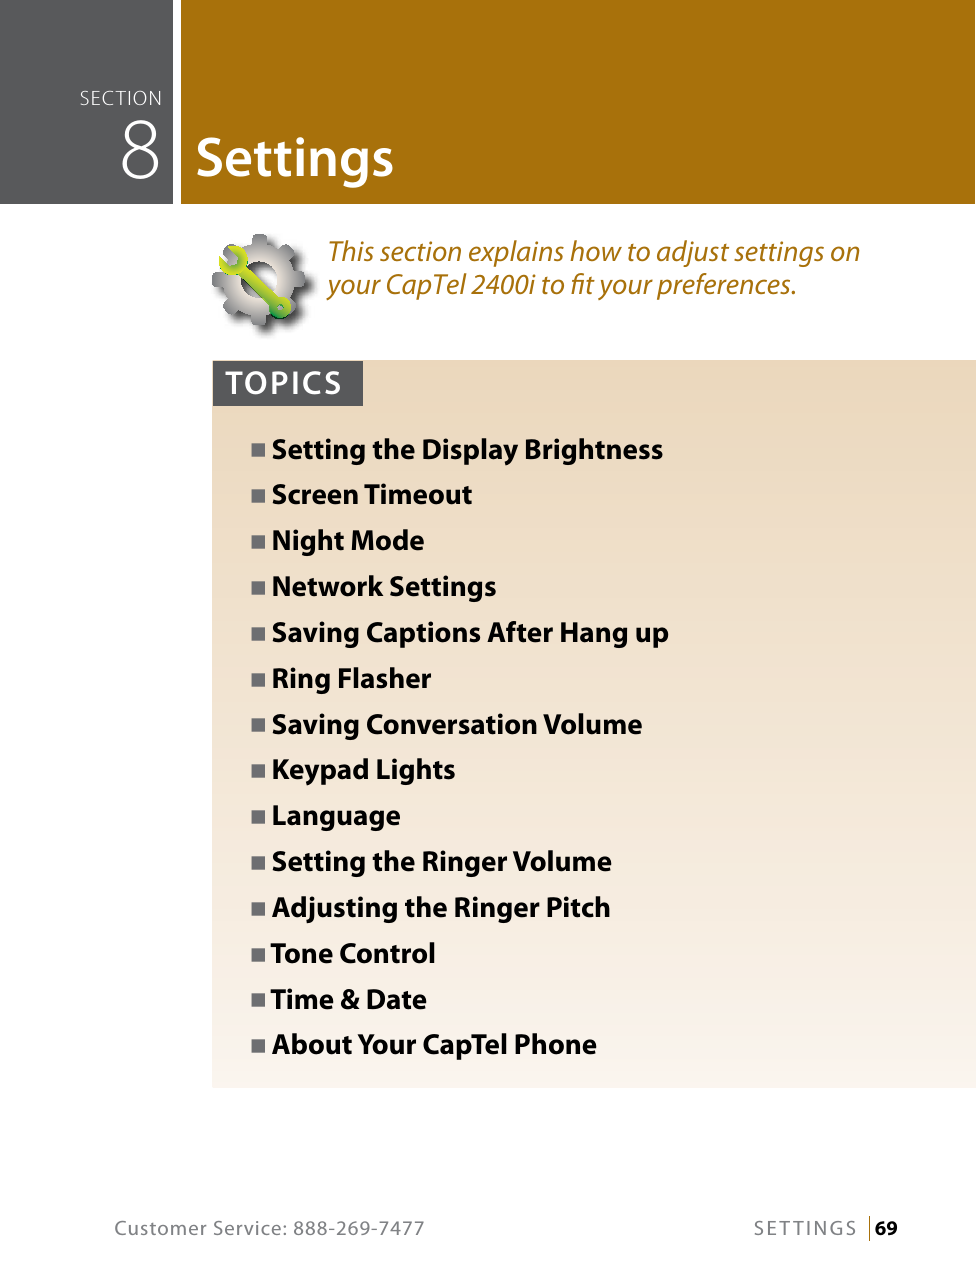 Customer Service: 888-269-7477 SETTINGS   69This section explains how to adjust settings on your CapTel 2400i to t your preferences.seCTiOn  8SettingsTOPICSN Setting the Display BrightnessN Screen TimeoutN Night ModeN Network SettingsN Saving Captions After Hang upN Ring FlasherN Saving Conversation VolumeN Keypad LightsN LanguageN Setting the Ringer VolumeN Adjusting the Ringer PitchN Tone ControlN Time &amp; DateN About Your CapTel Phone